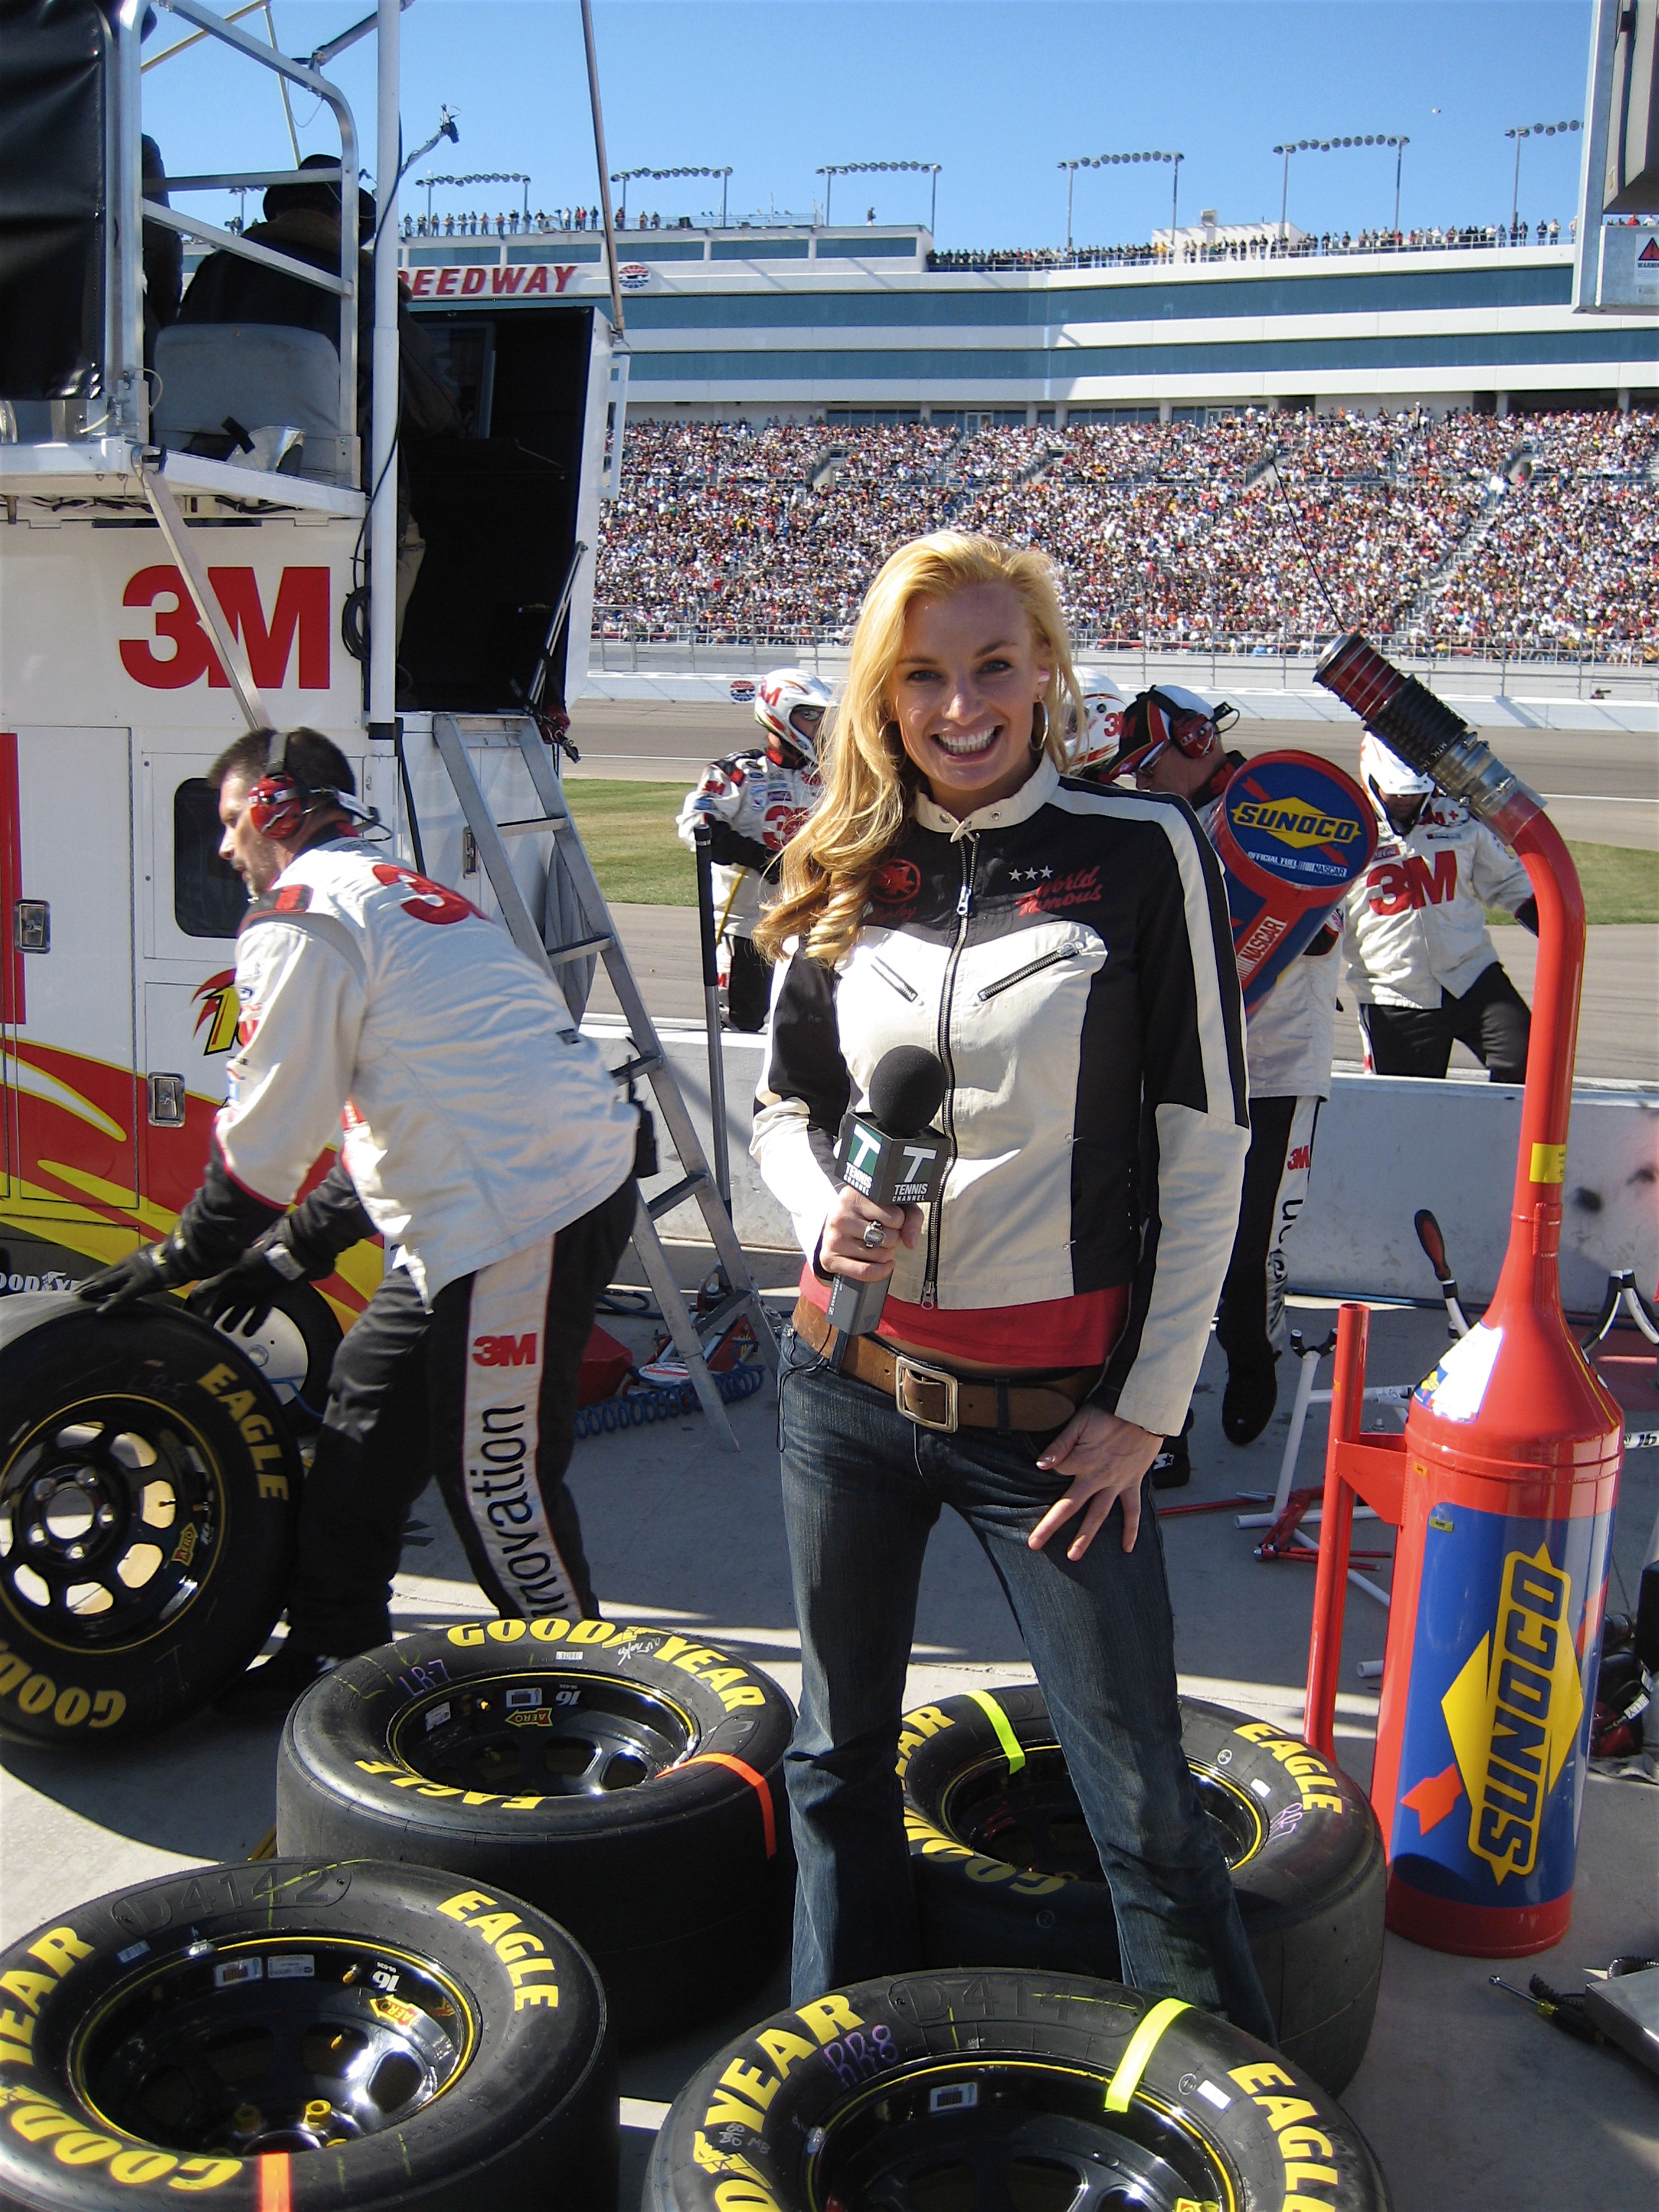 'Off the Strip with Mieke Buchan' host Mieke Buchan. Shooting story in the Nascar Pits. Las Vegas. @008